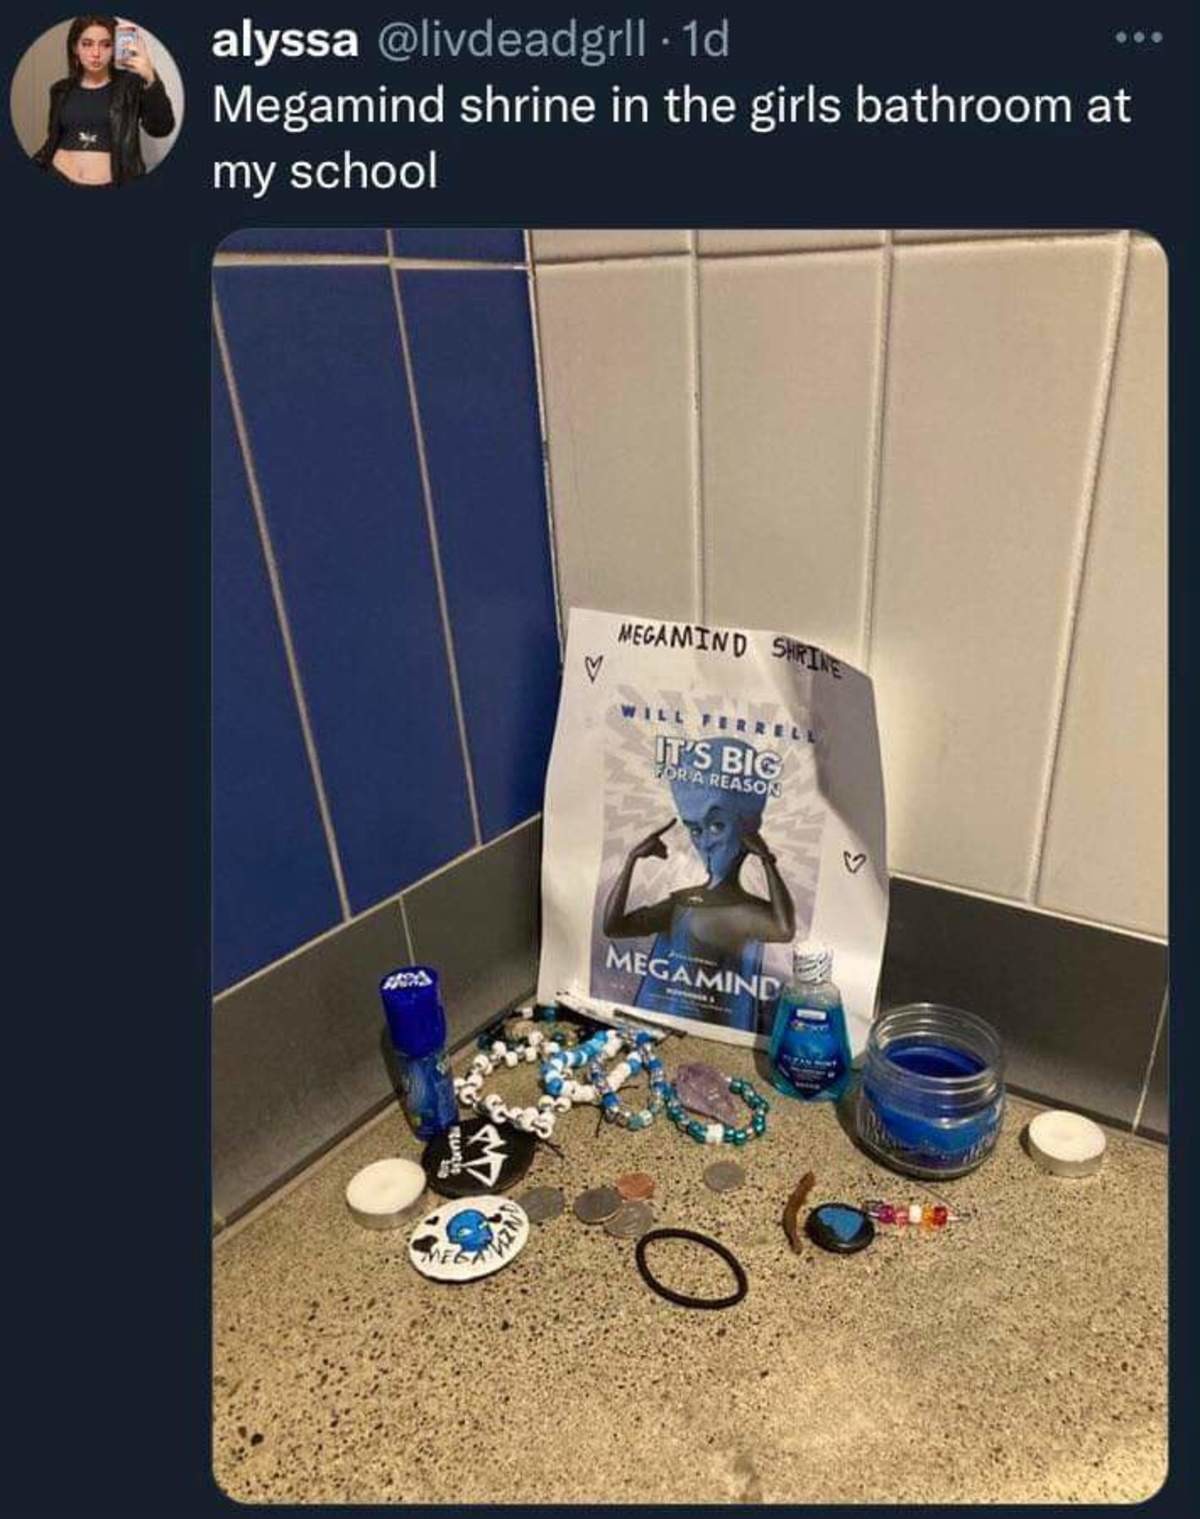 megamind. .. you cant just tell everyone about the girls bathroom megamind shrine. Its for the girls. Now the boys are gonna want to make a boys megamind shrine. you Alyssa